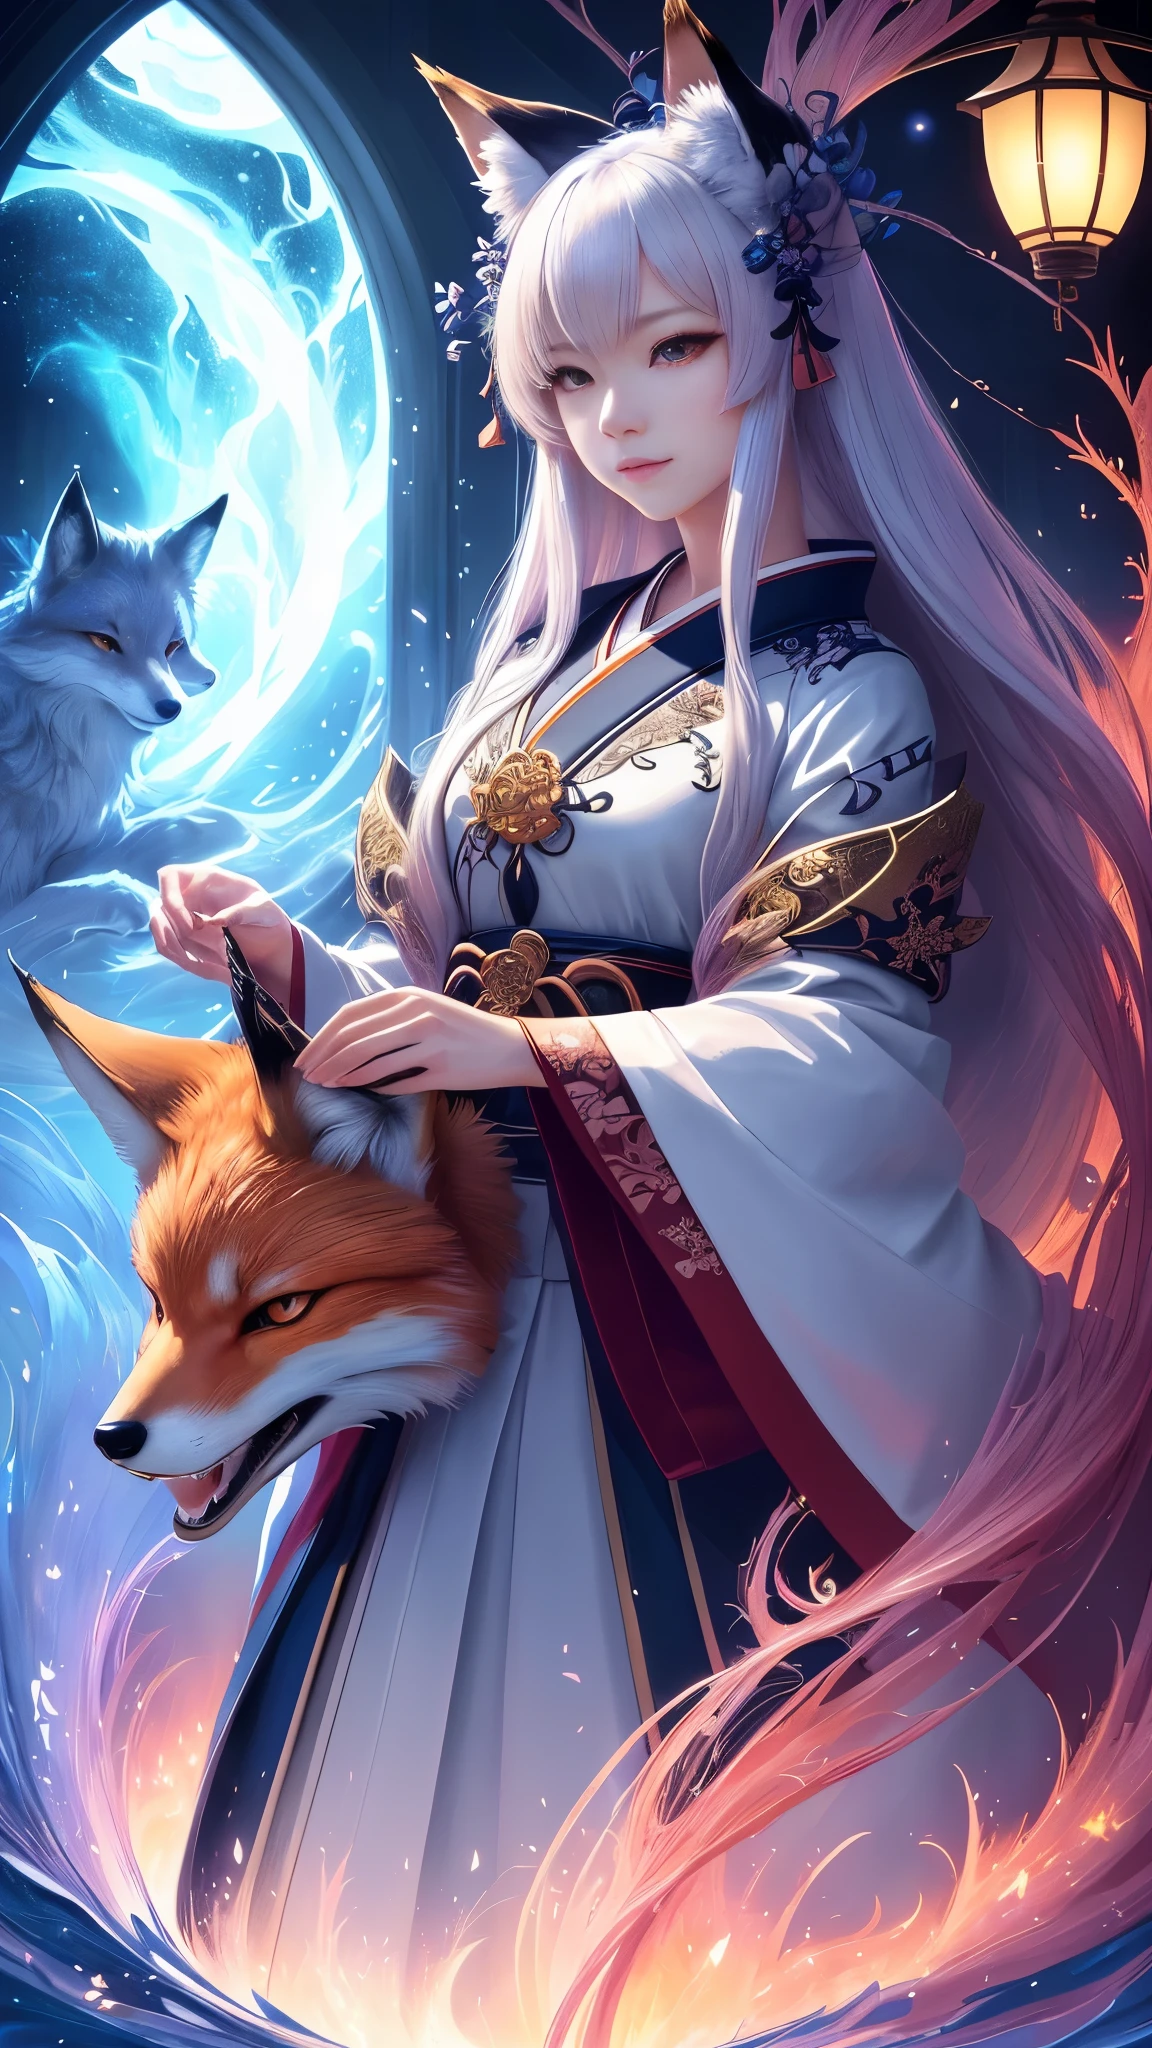 Close-up, For the, masterpiece, beautiful details, colorful, delicate details, delicate lips, intricate details, genuine, ultrargenuineista, Girl with multicolored haired fox sitting on a branch:sexly, fascinating, ,Colorful Fox, raposa de nine tails, Three tails Fox, Three tails Fox, onmyoji detailed art, beautiful fine art illustration, mythical creatures, Fox, beautiful digital art,shrine maiden,japanese architecture,hold hands,exquisite digital illustration, mizutsune, Inspired by mythical wild web creatures, pixiv in digital art, shining light, high contrast, Mysterious,Girl with multicolored haired fox sitting on a branch,front,looking at the camera